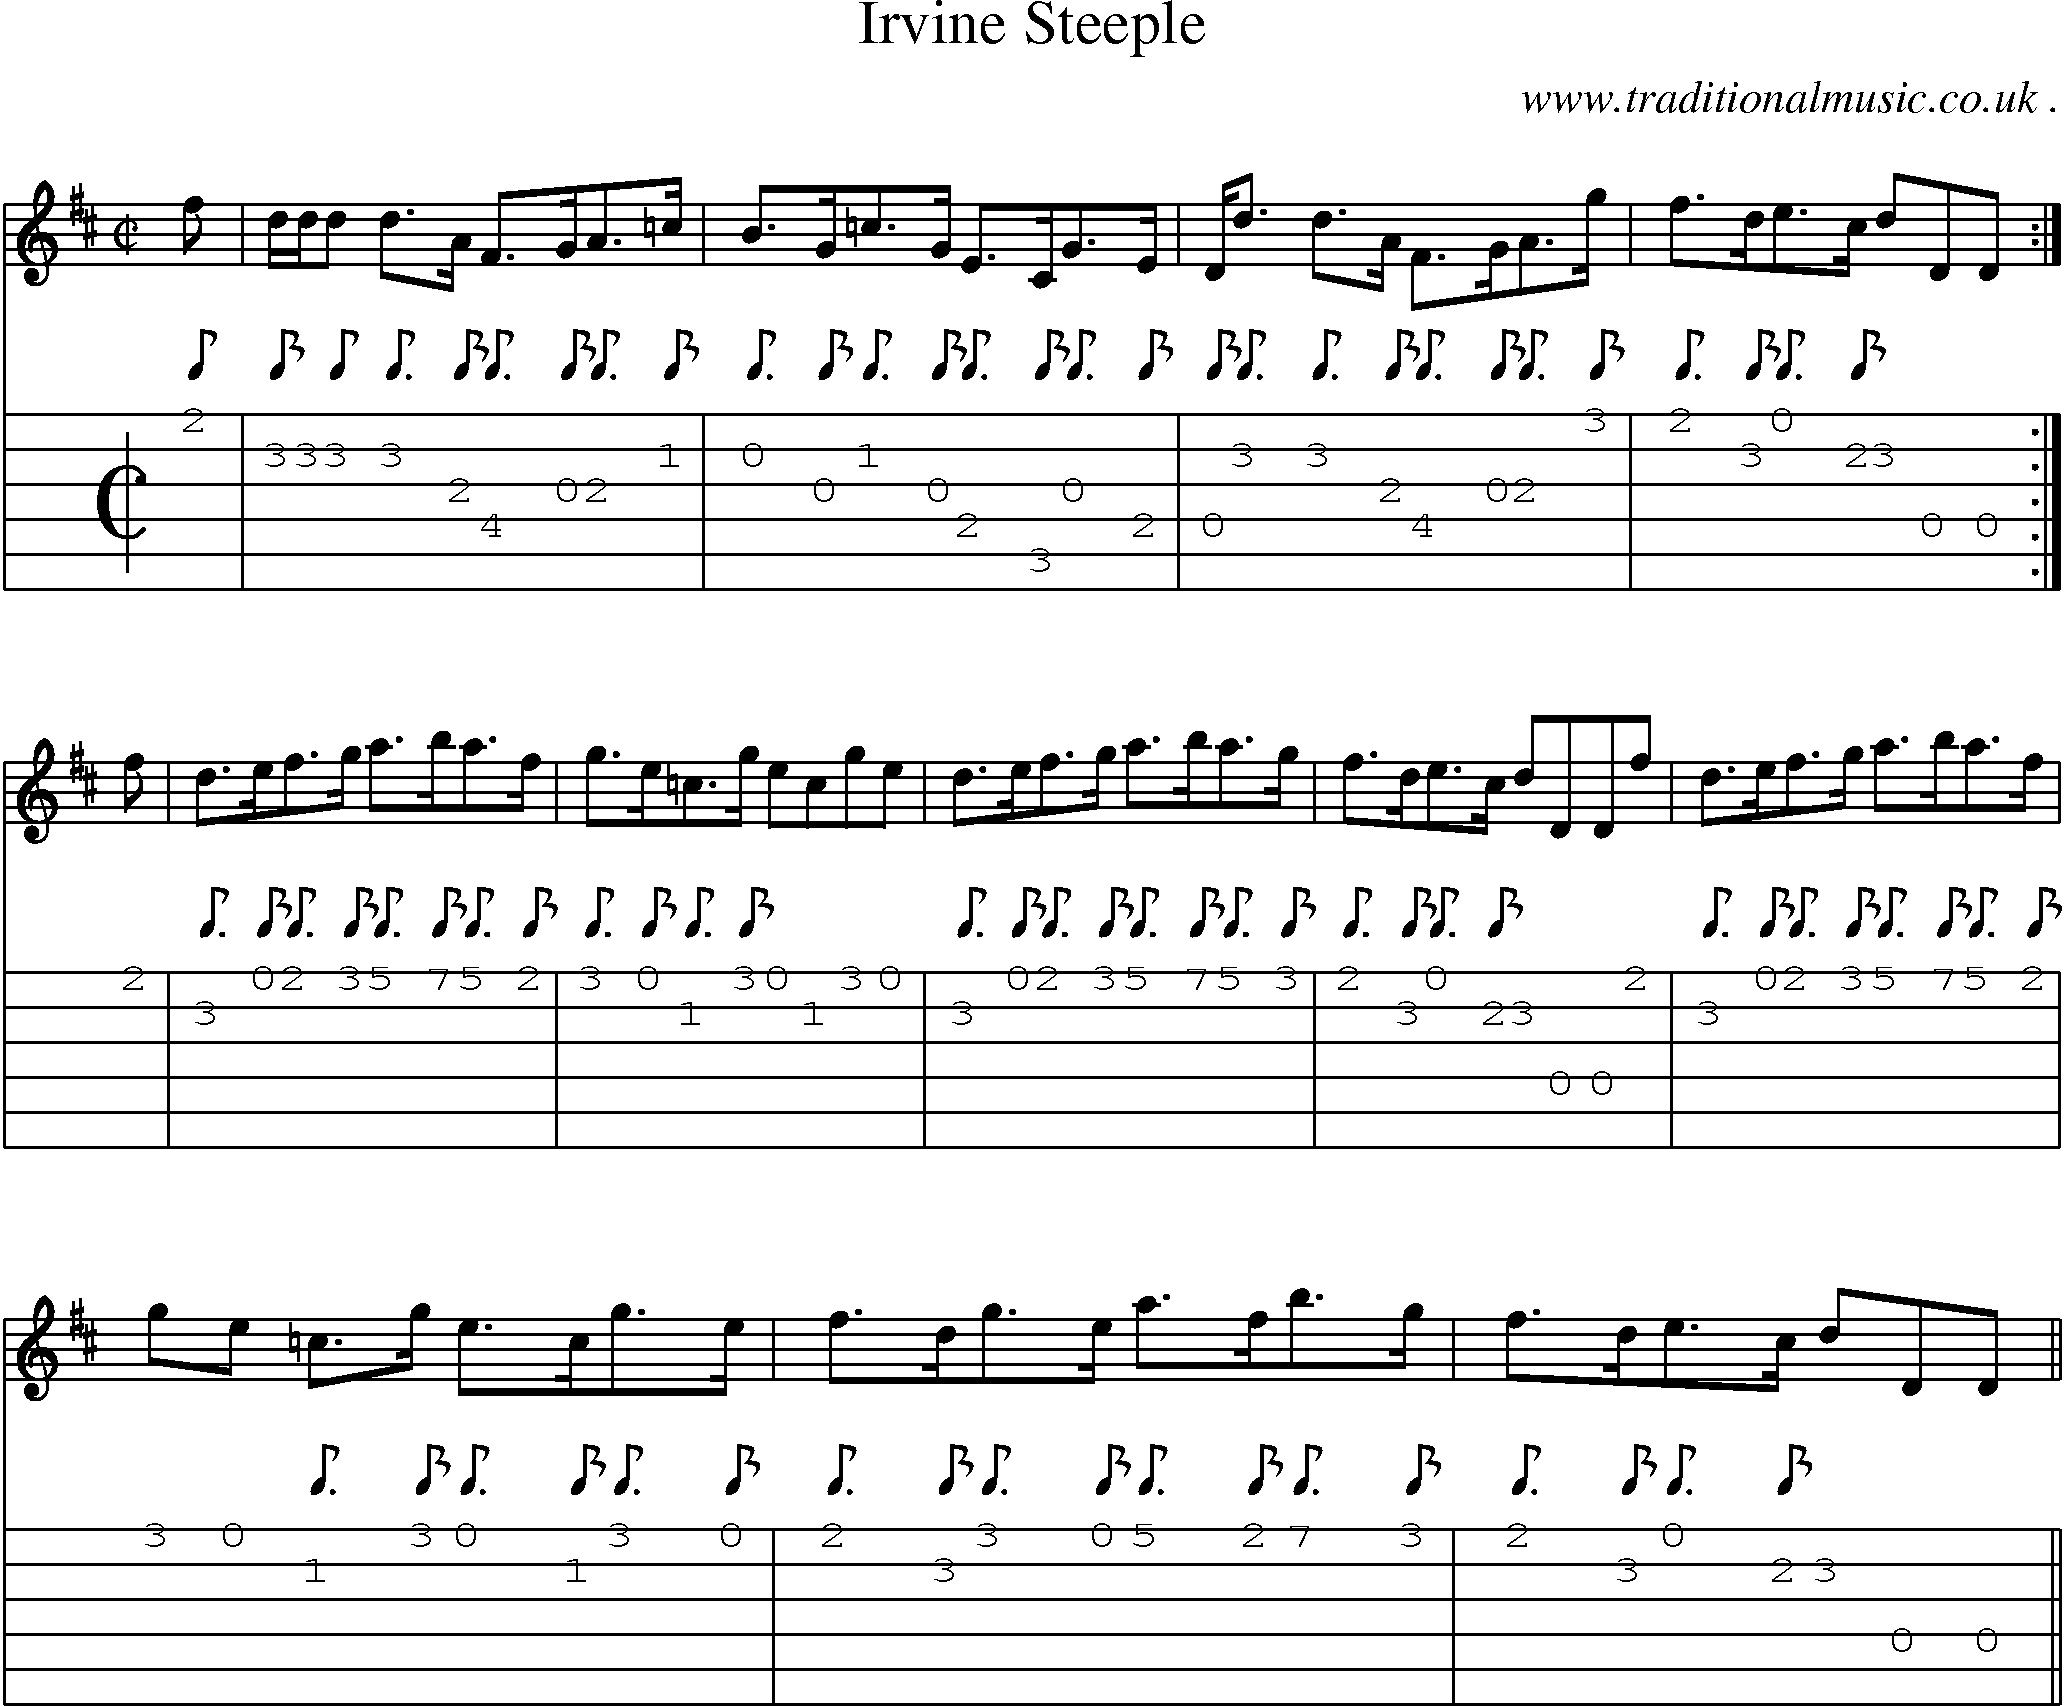 Sheet-music  score, Chords and Guitar Tabs for Irvine Steeple